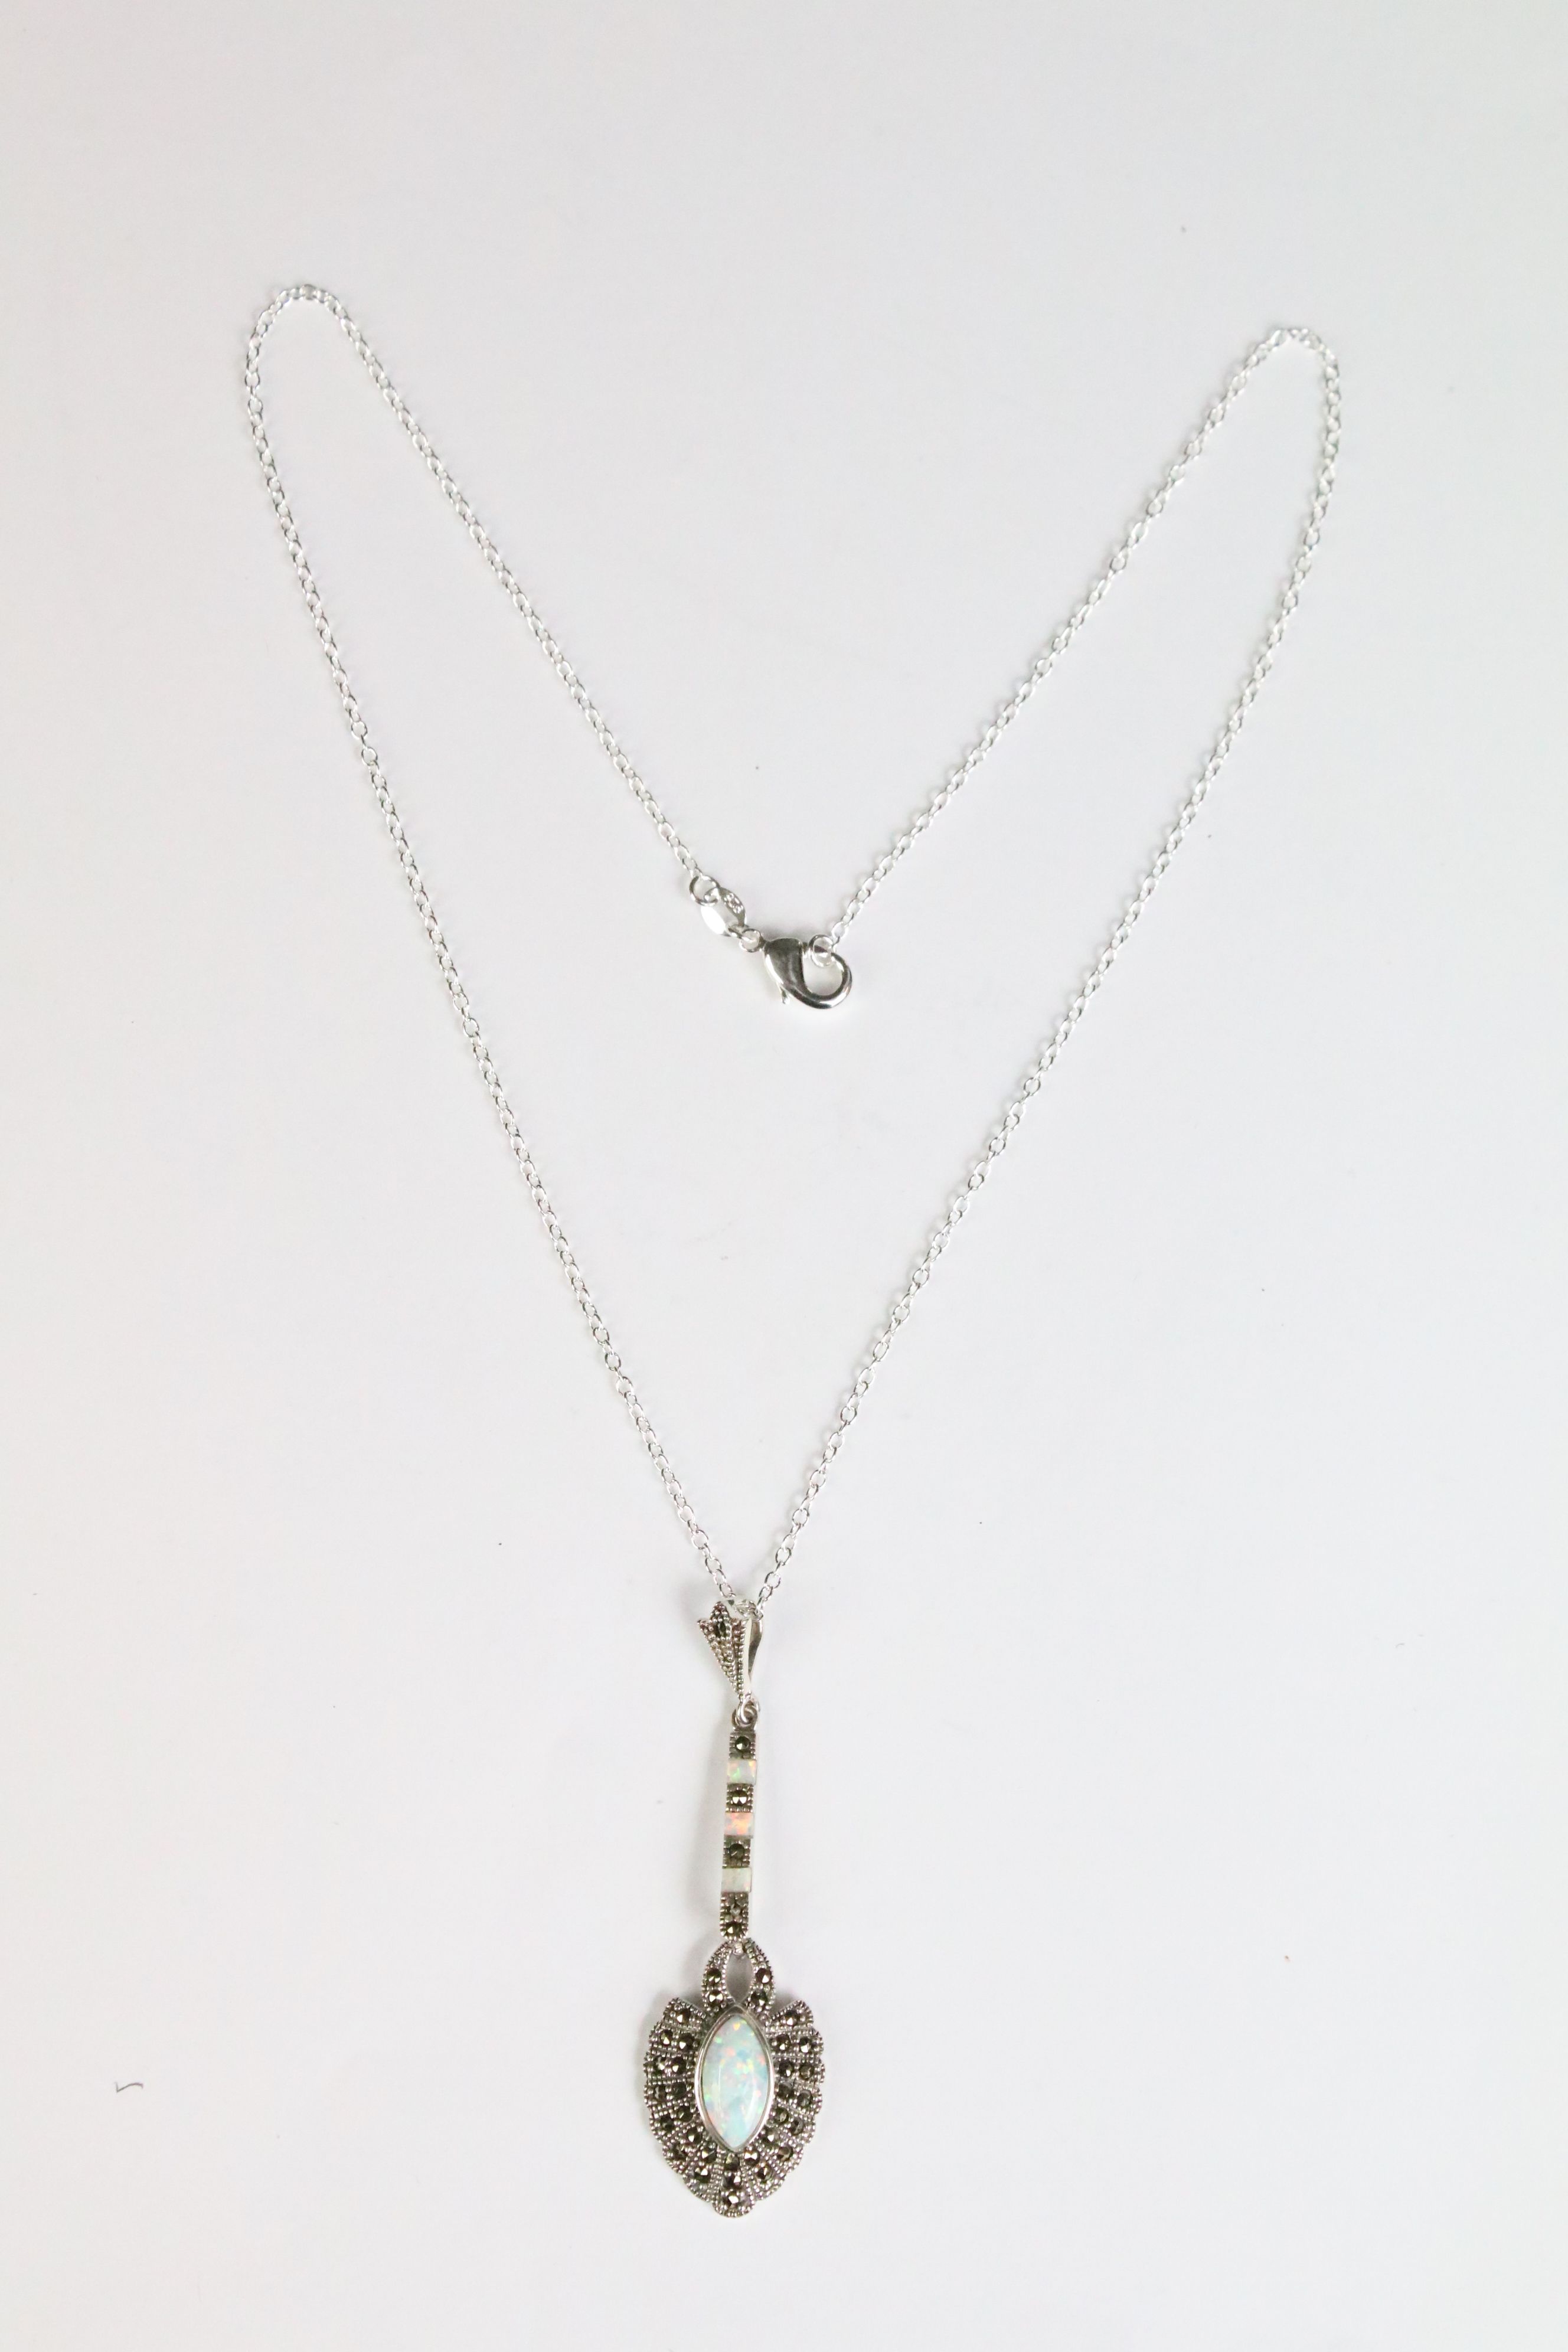 A silver and marcasite necklace set with opal panel - Image 3 of 6